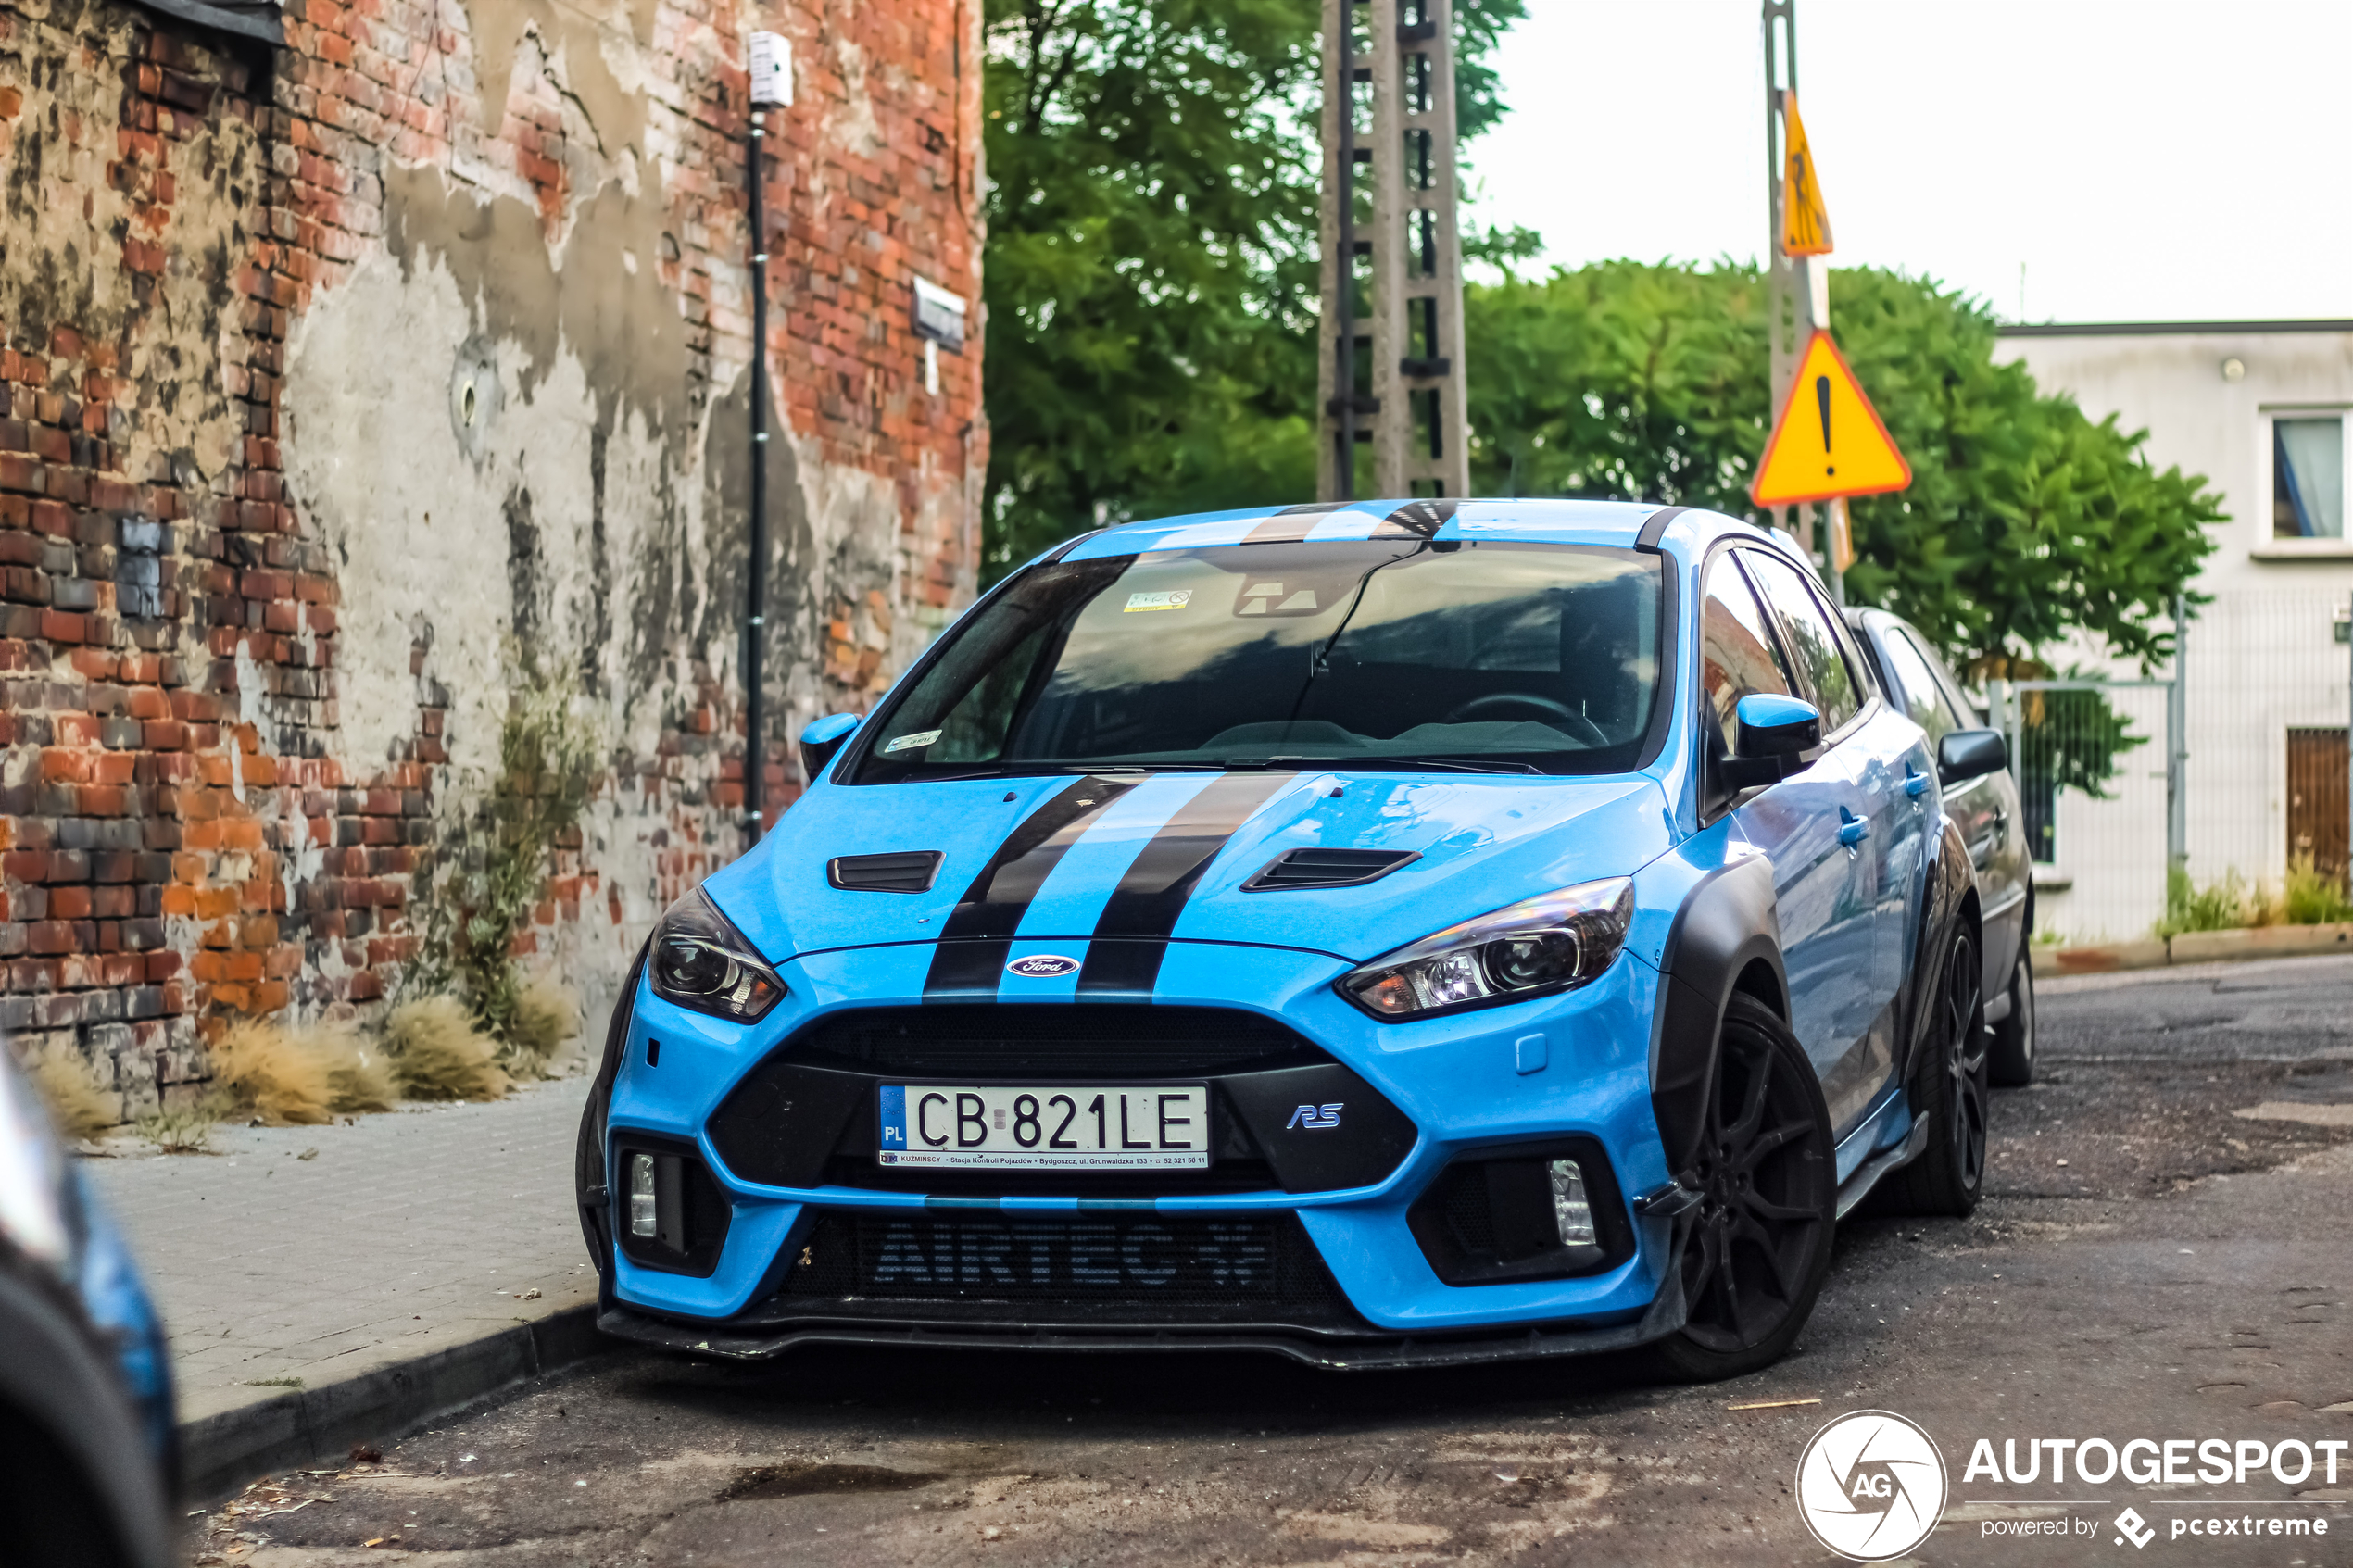 Airtec - Wide Body Kit Ford Focus RS MK3